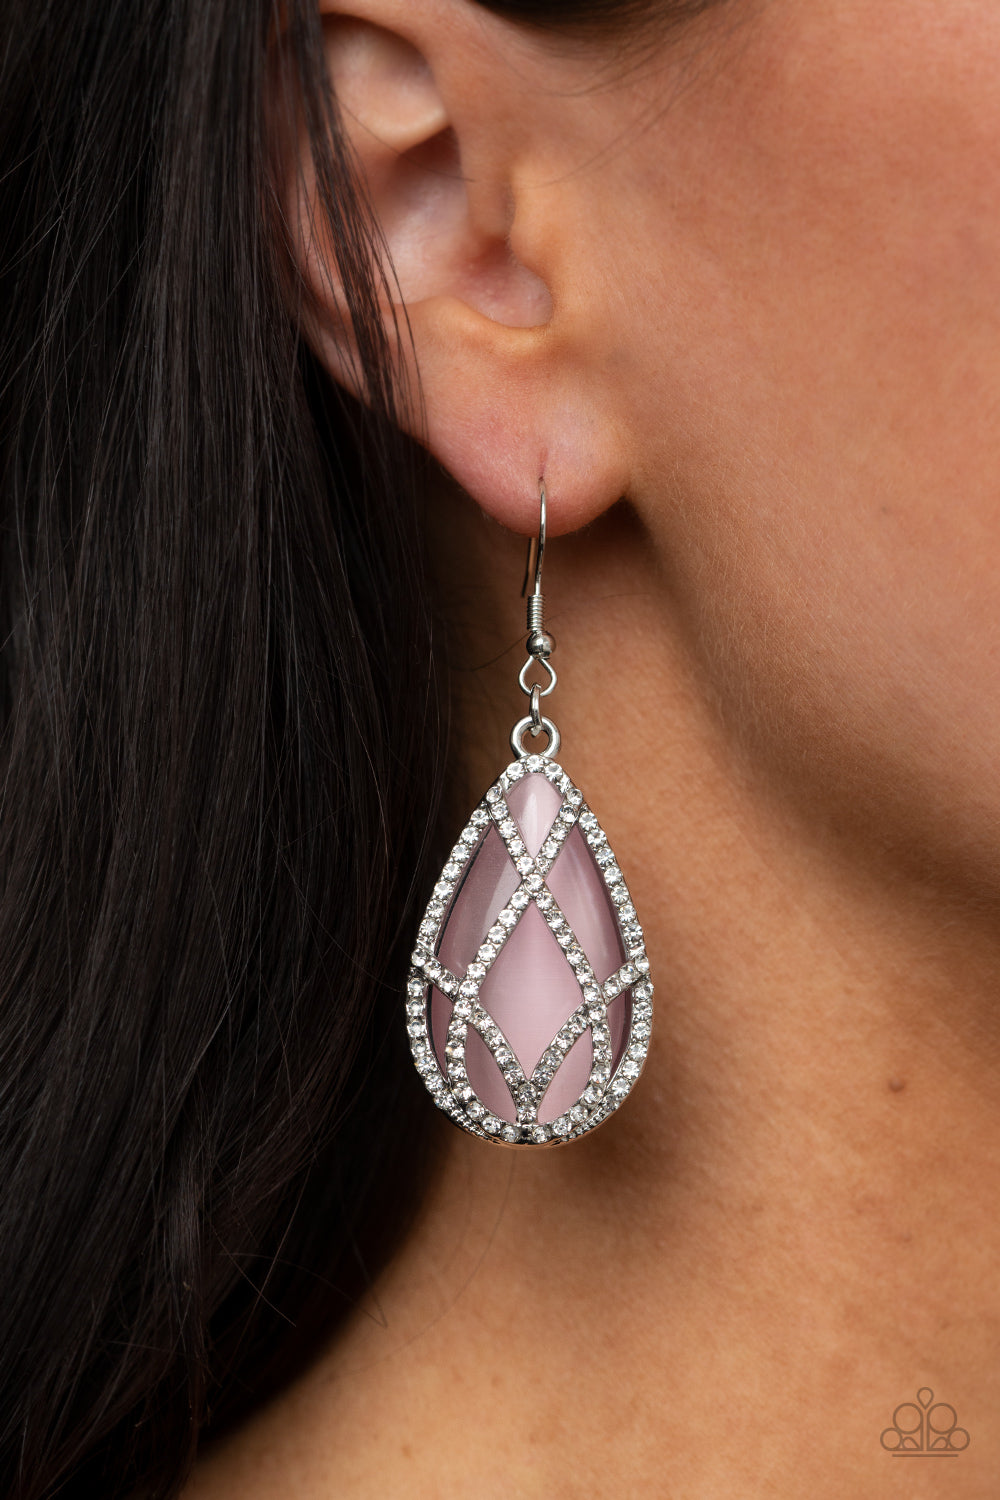 Crawling With Couture Pink Earring - Paparazzi Accessories. White rhinestone encrusted silver bars crisscross into a glittering beveled teardrop that delicately overlaps an oversized pink teardrop cat's eye stone, creating a luminously layered lure. Earring attaches to a standard fishhook fitting.  All Paparazzi Accessories are lead free and nickel free!  Sold as one pair of earrings.